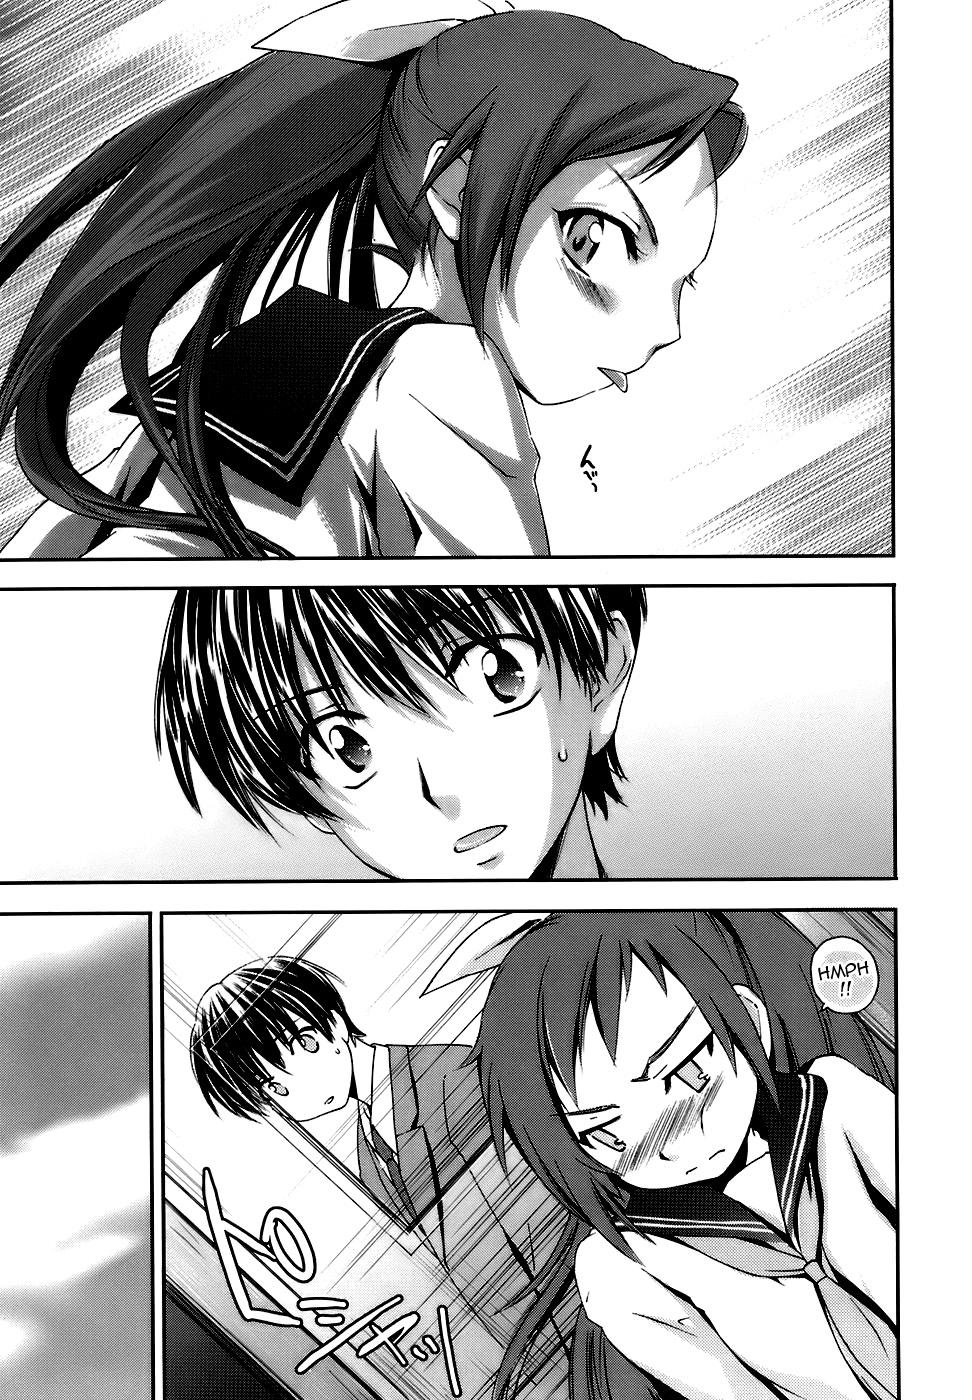 Grande Fresh Lovers Chapter 7 - Age of Dishonesty Spooning - Page 3